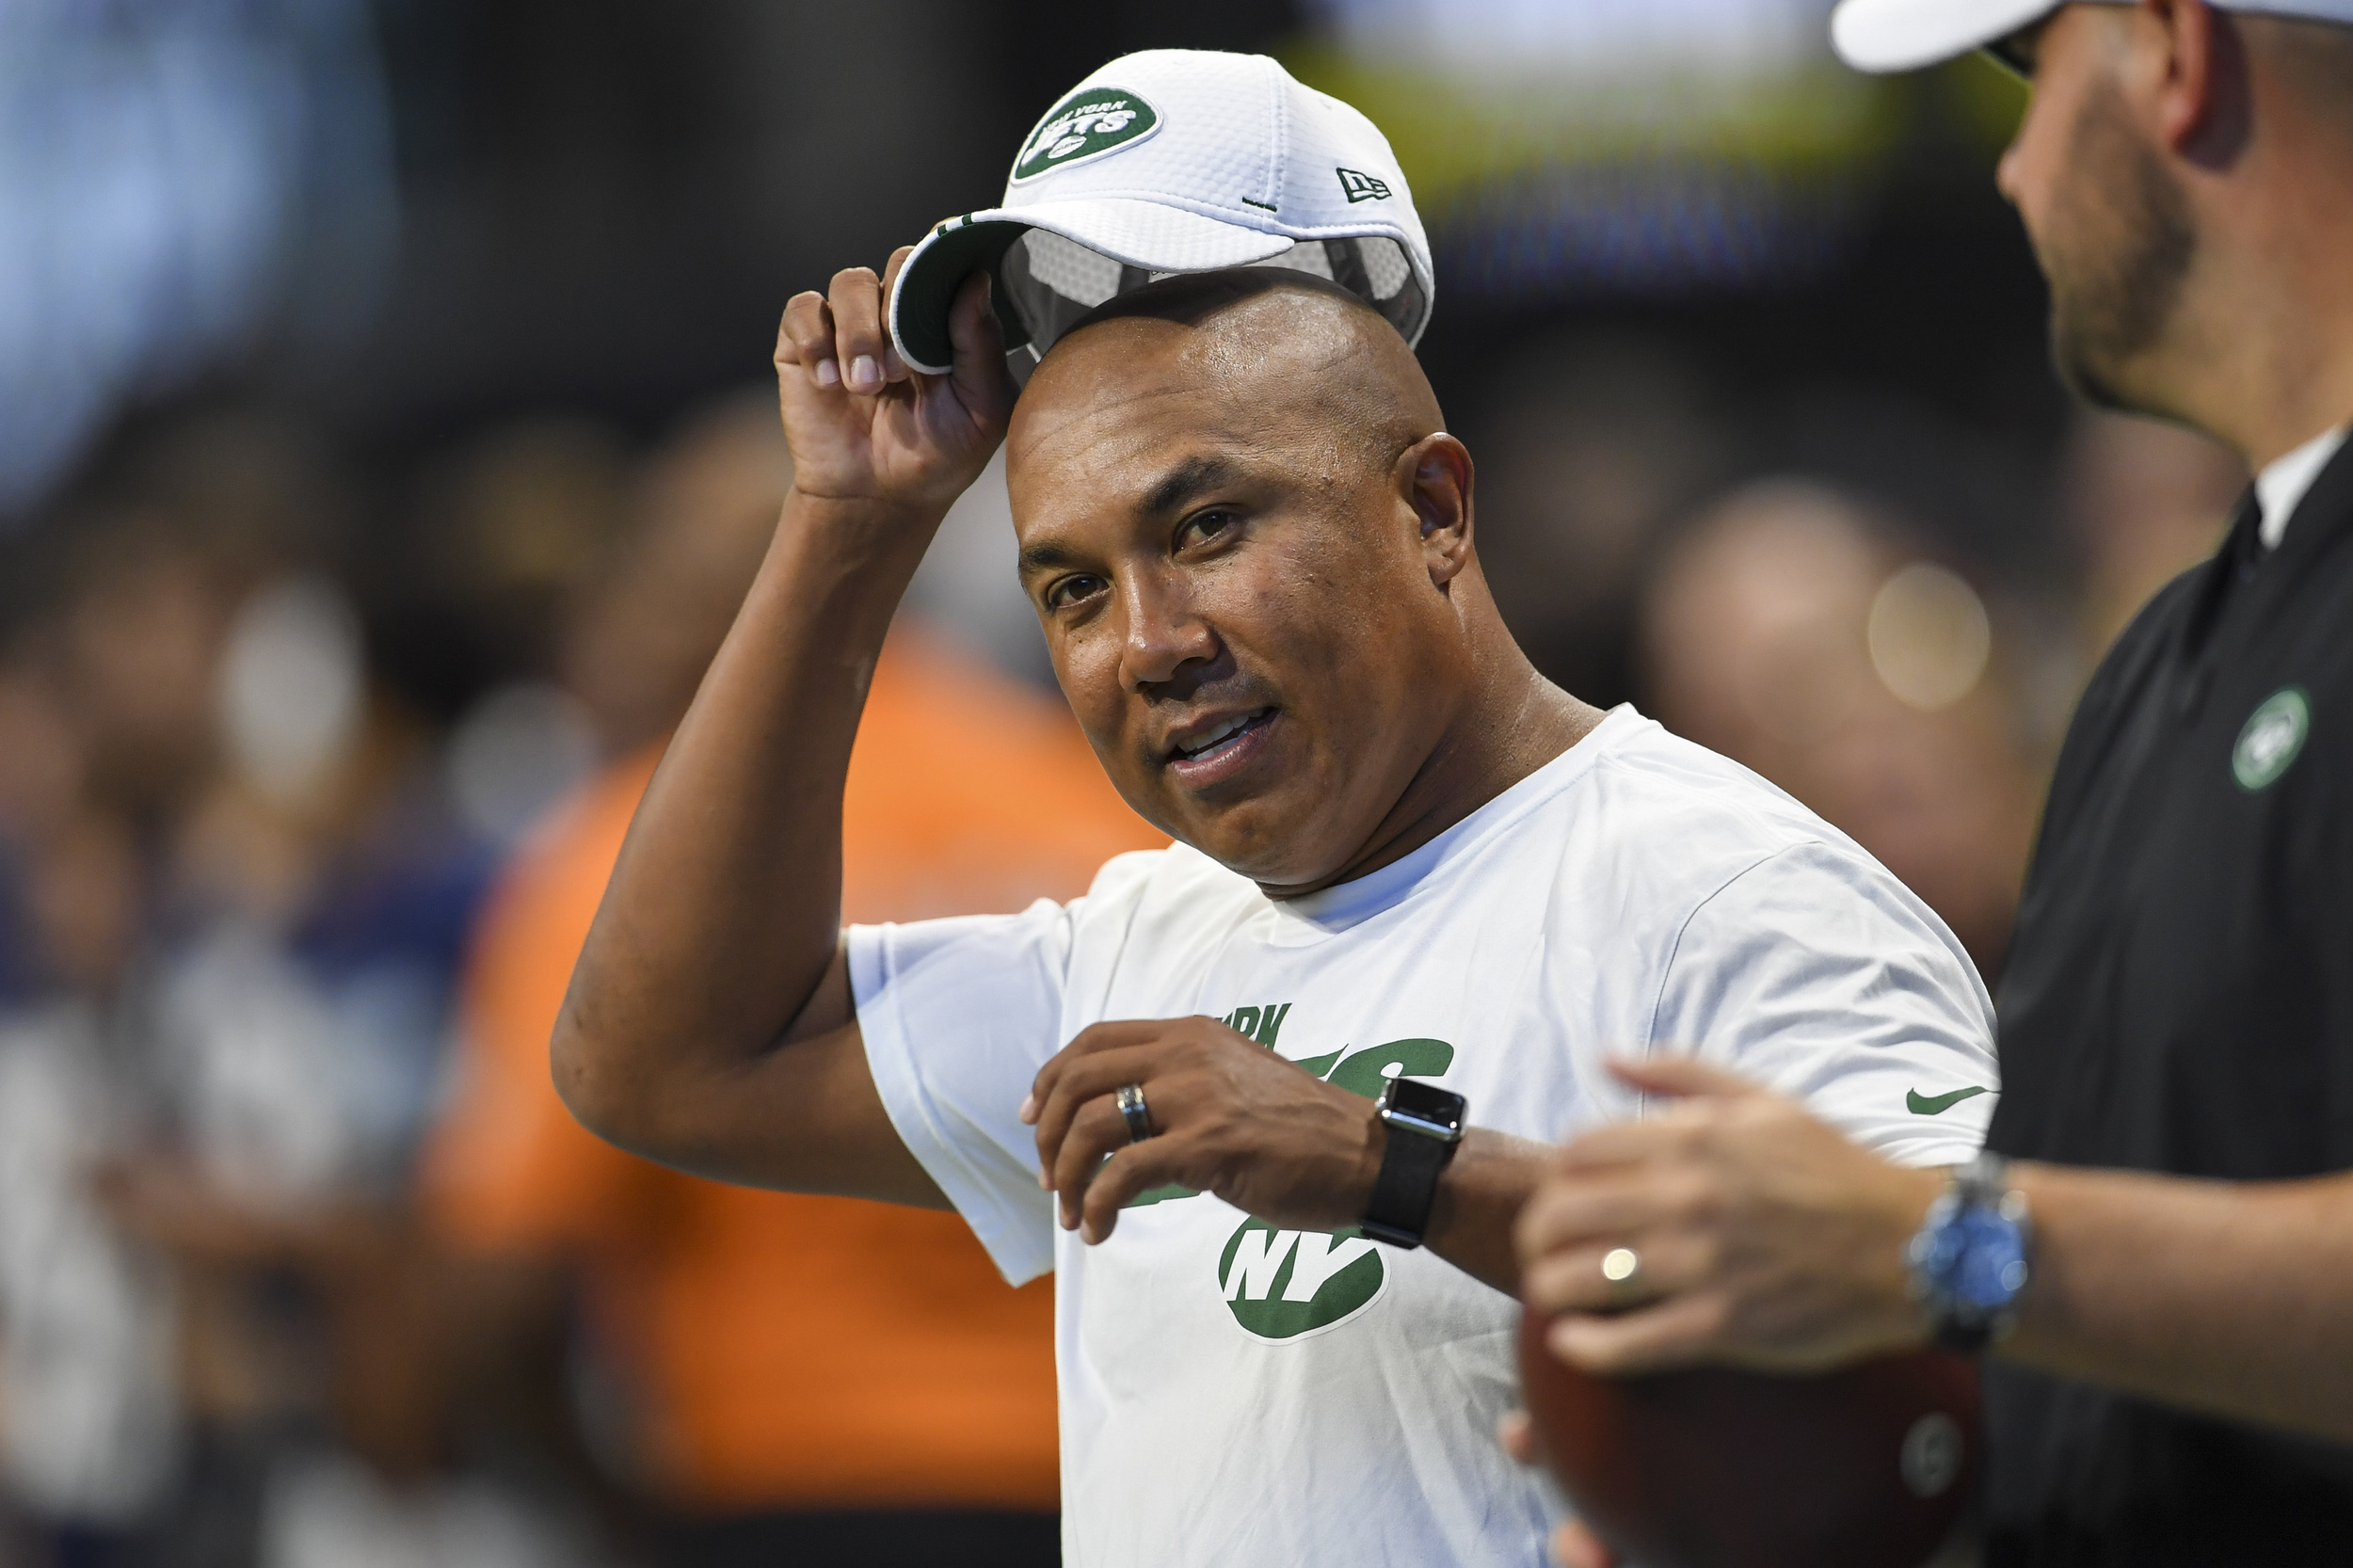 former steelers wr hines ward emerges as candidate for college head coach job